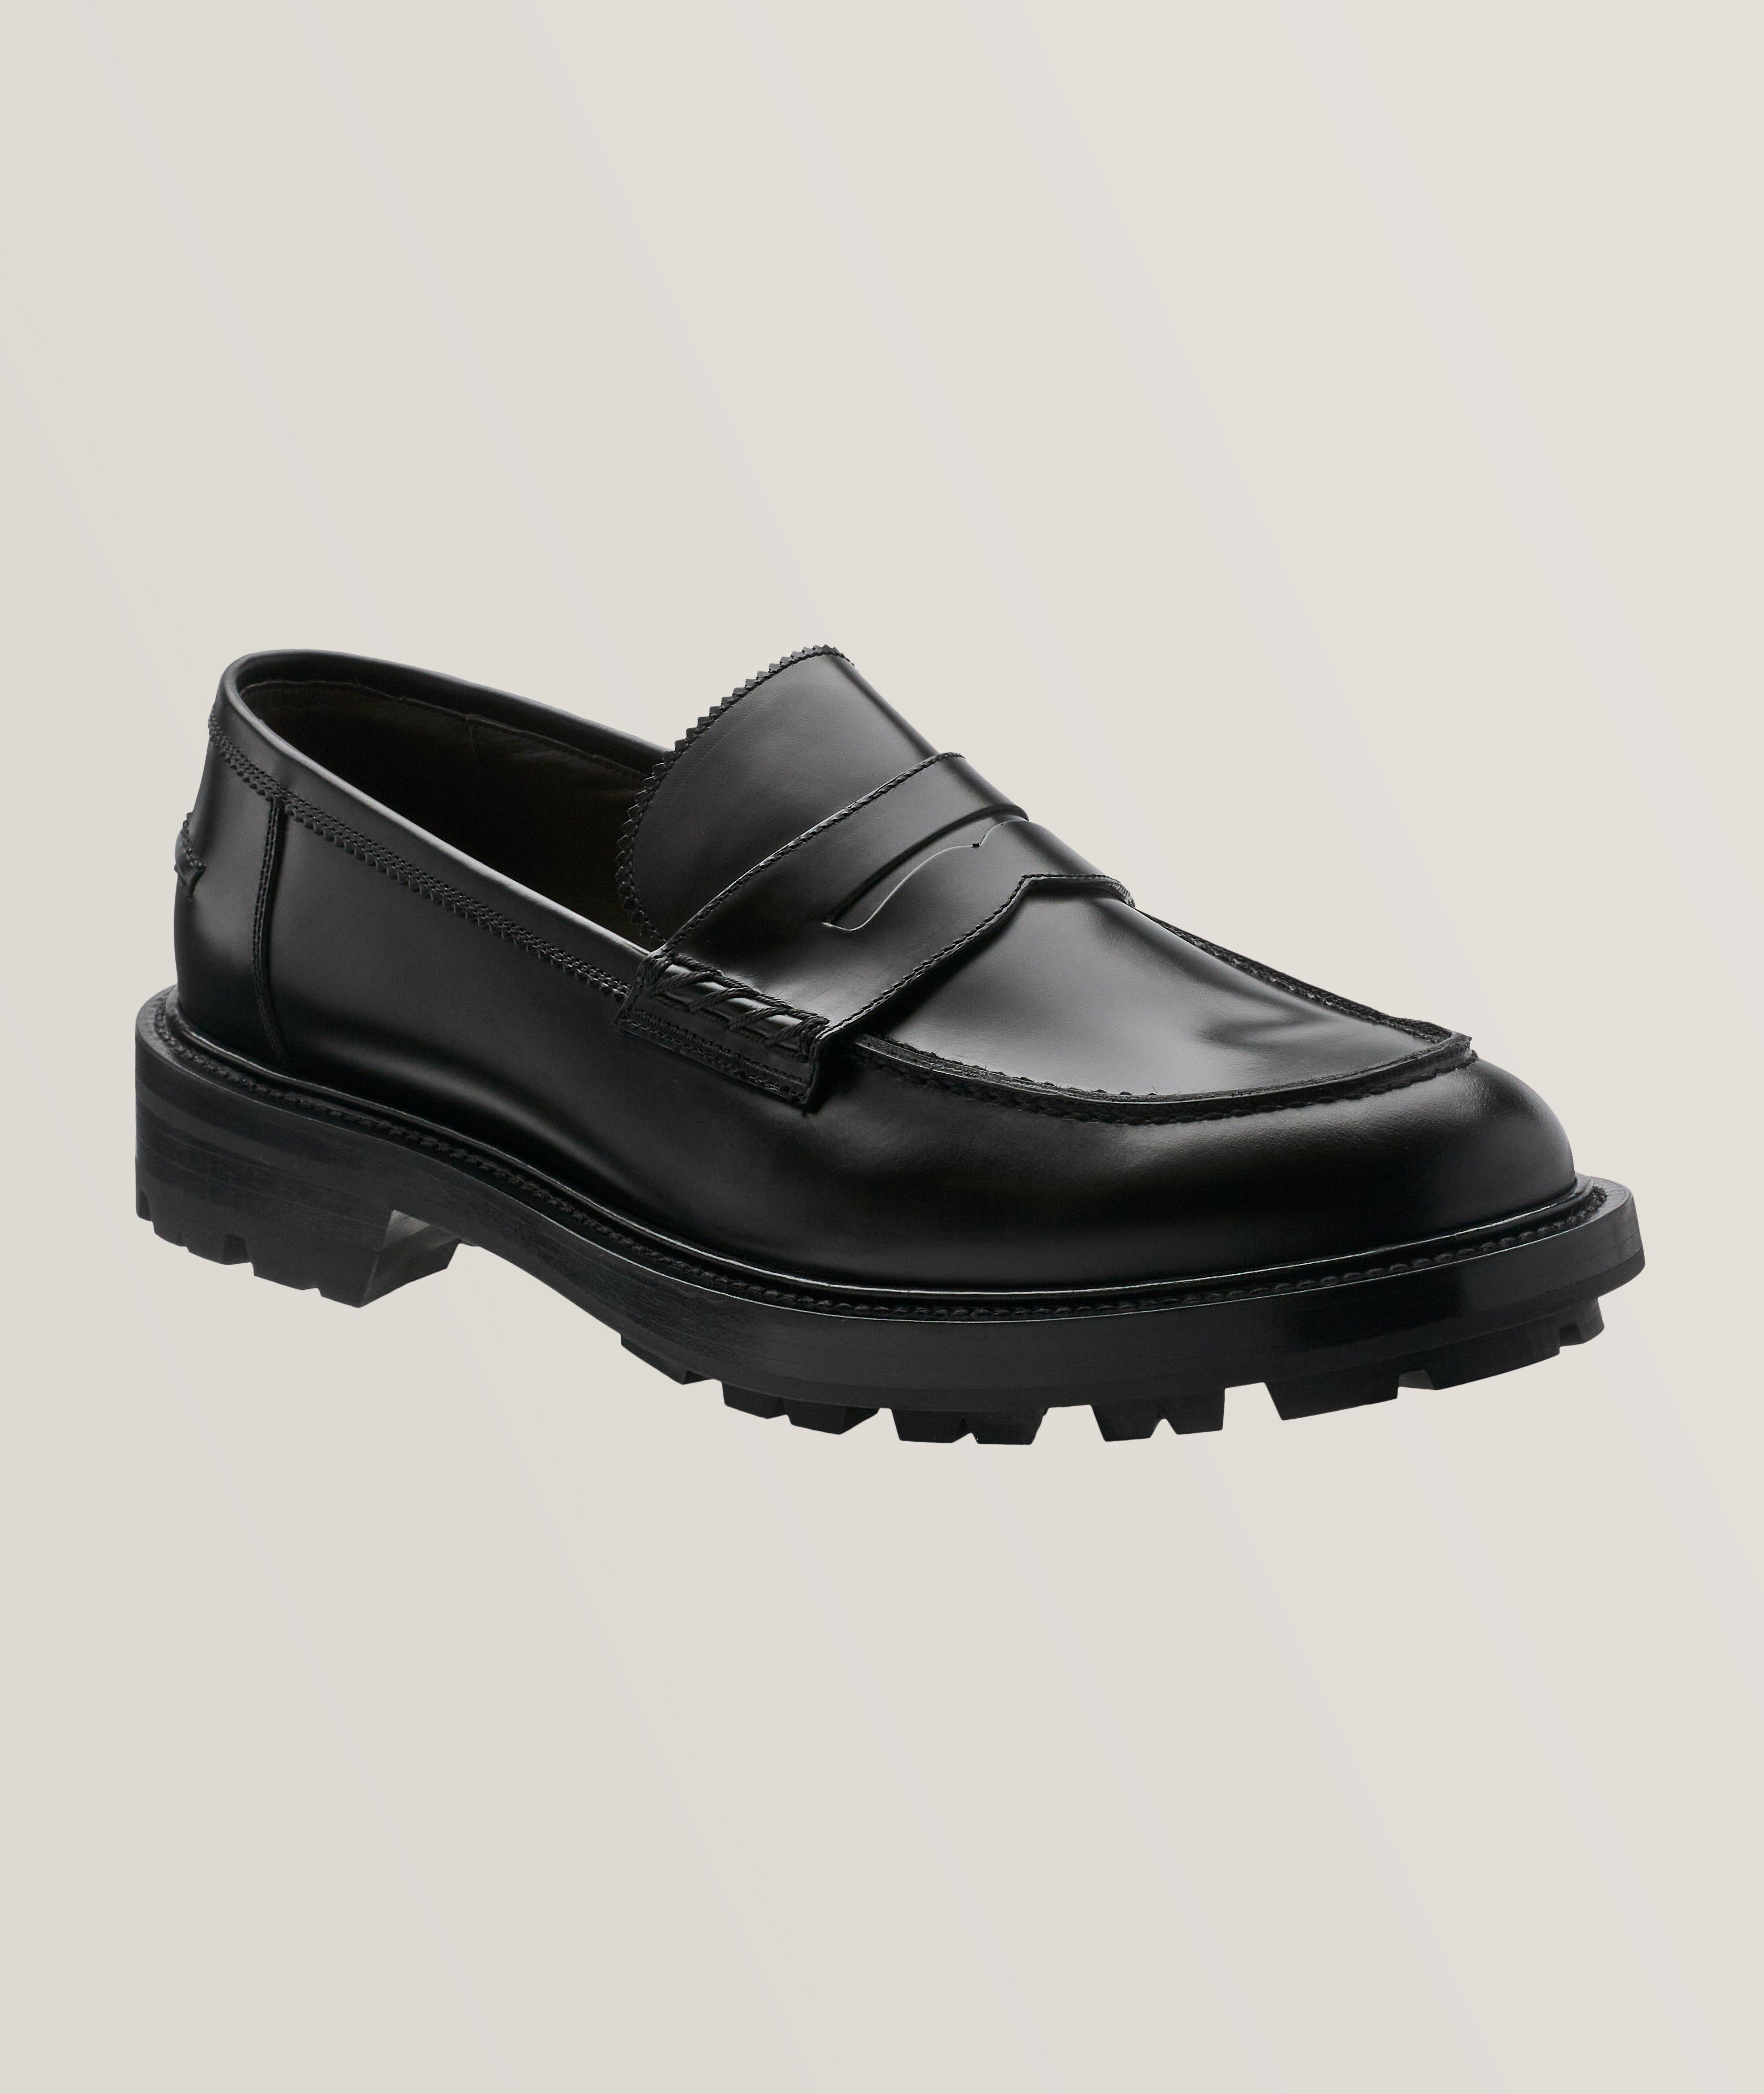 Polished Leather Penny Loafers image 0